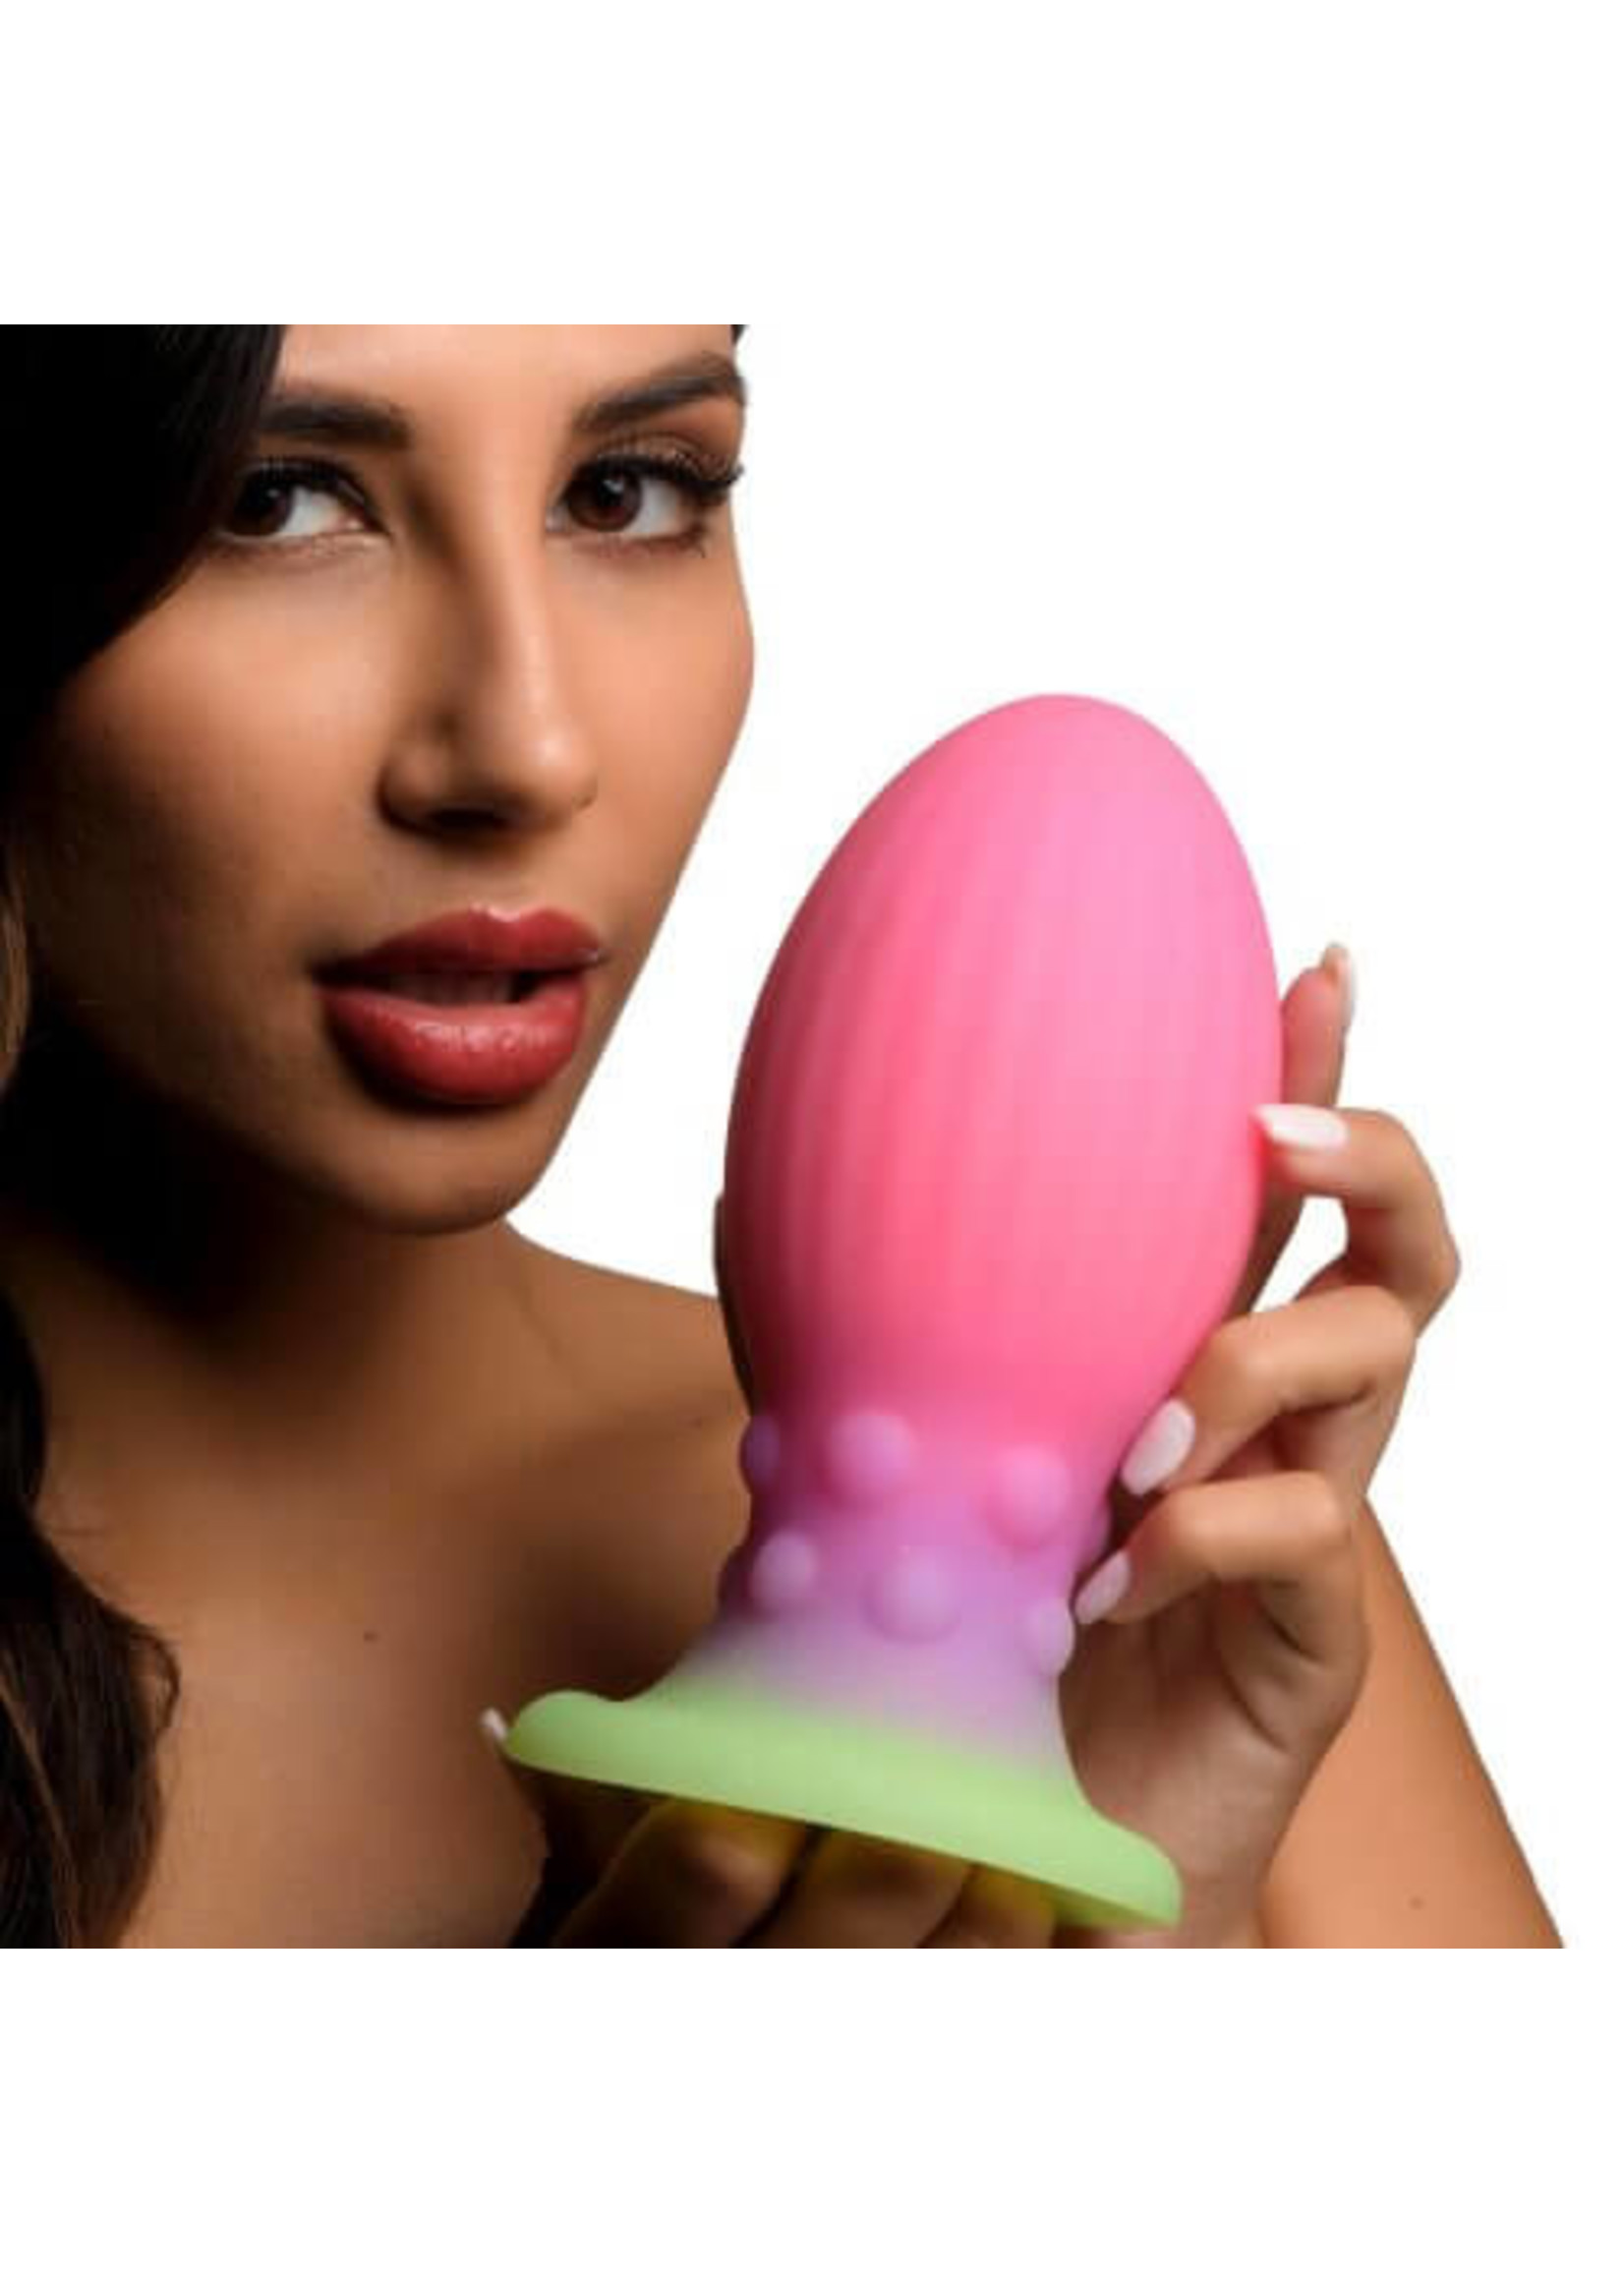 XR Brands Xeno Egg Glow in the Dark Silicone Egg